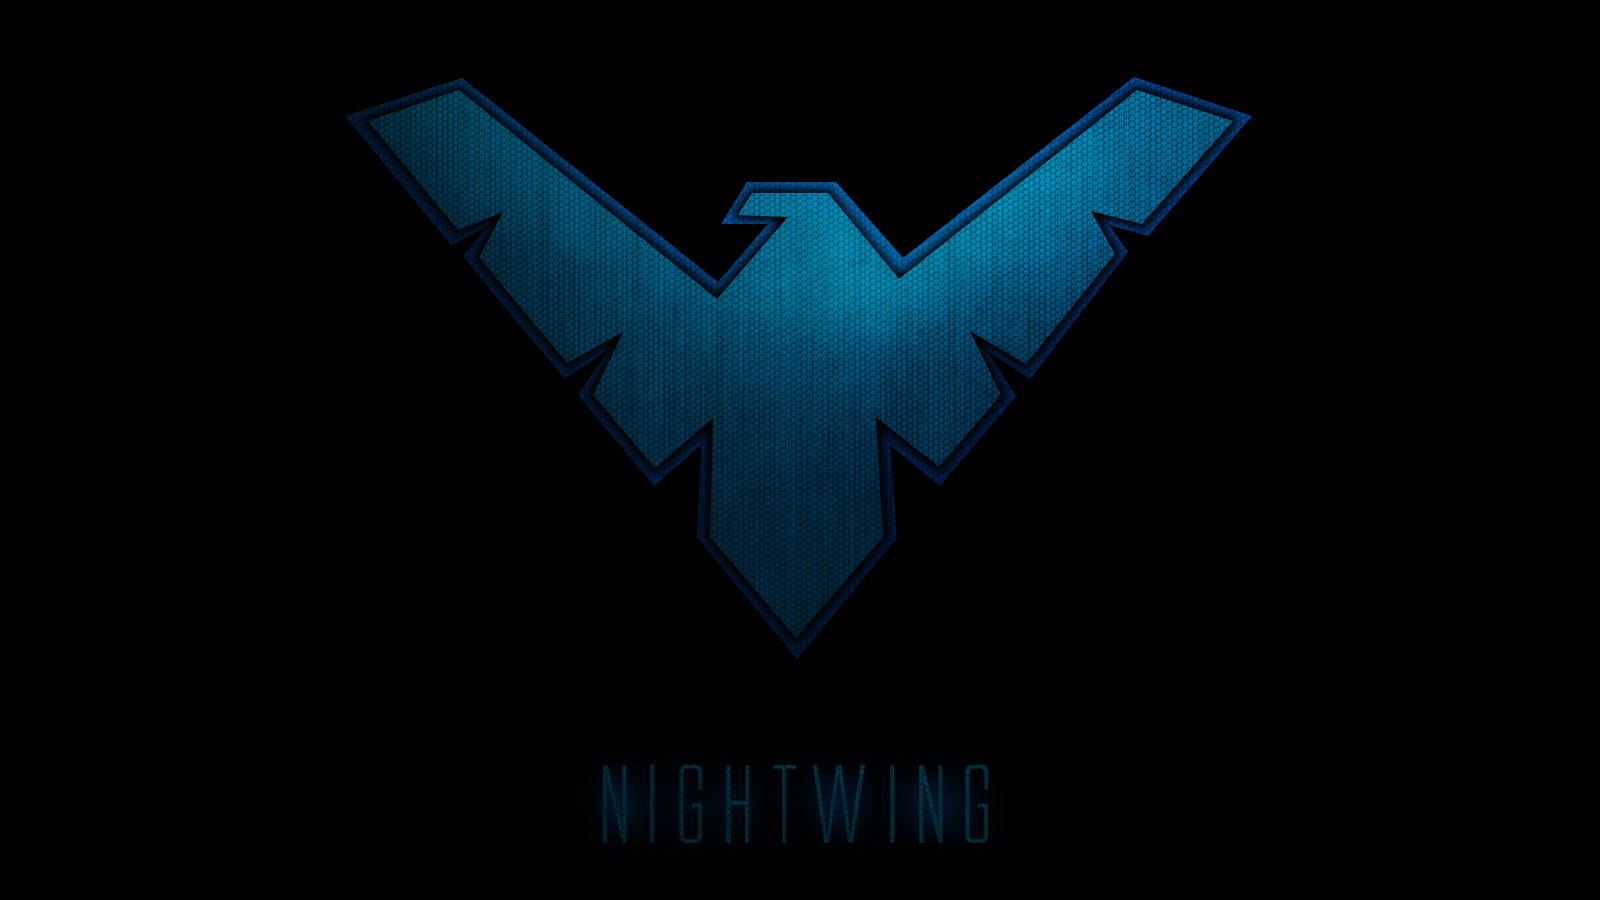 Nightwing by DeiNyght 1600x900